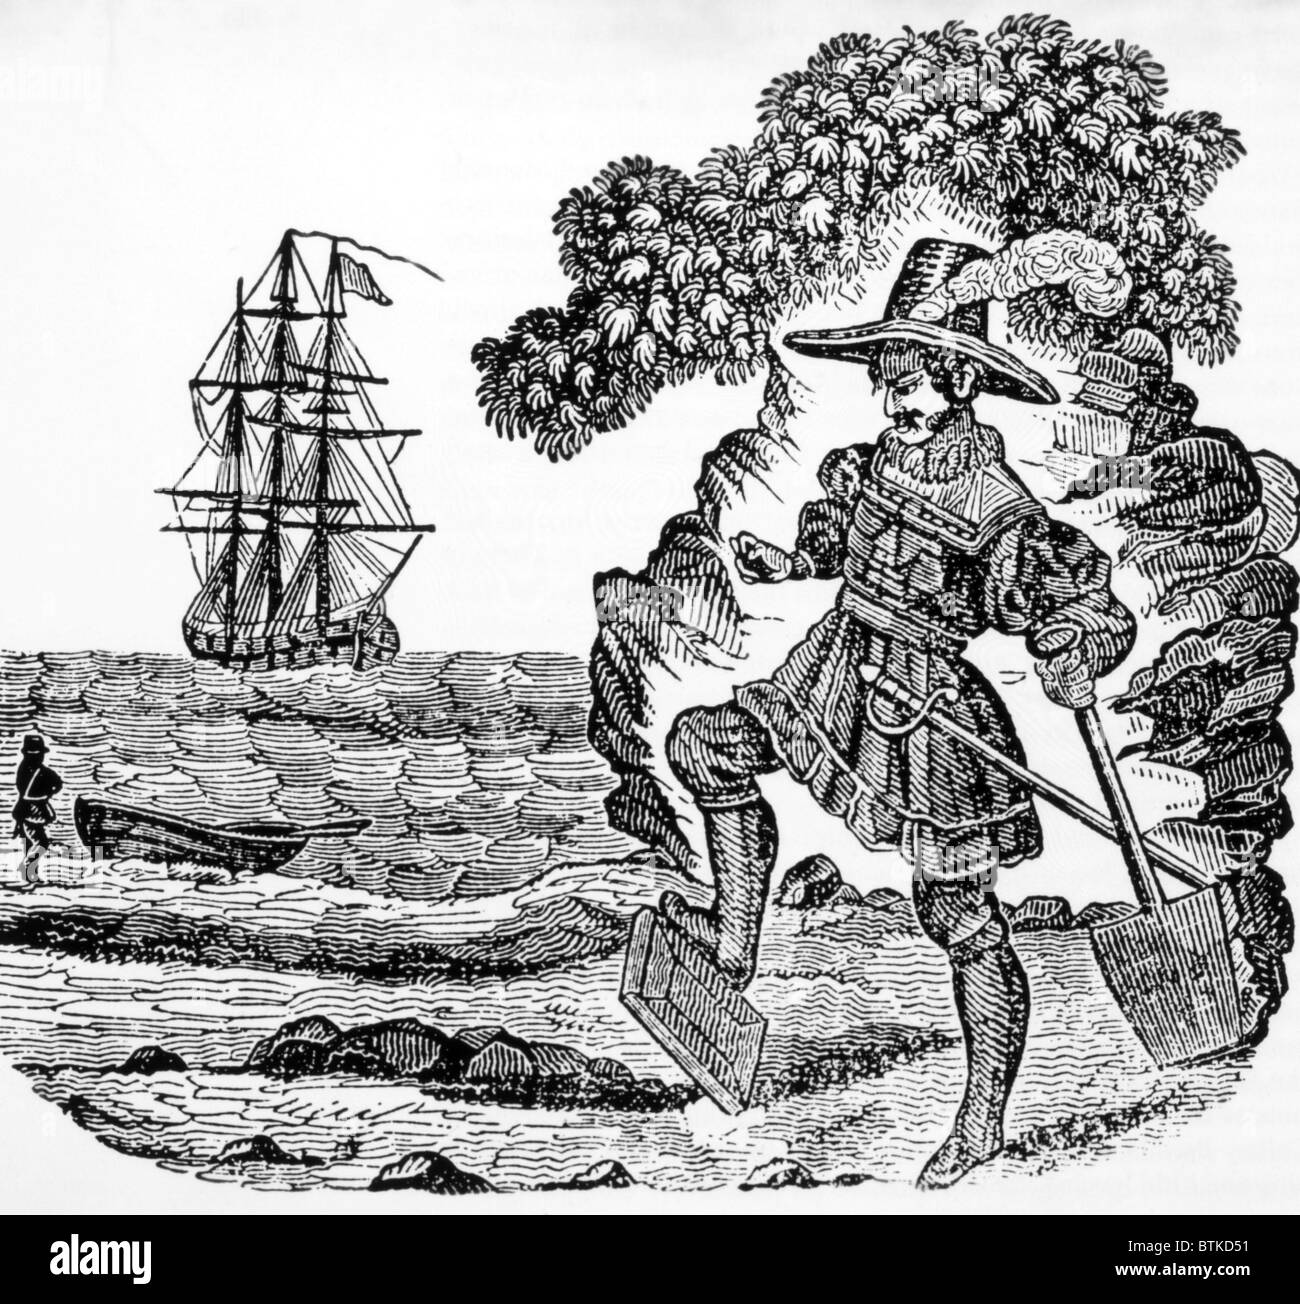 Captain William Kidd, (c. 1645-1701), British privateer and pirate shown burying a Bible near Plymouth Sound to launch his career. Stock Photo